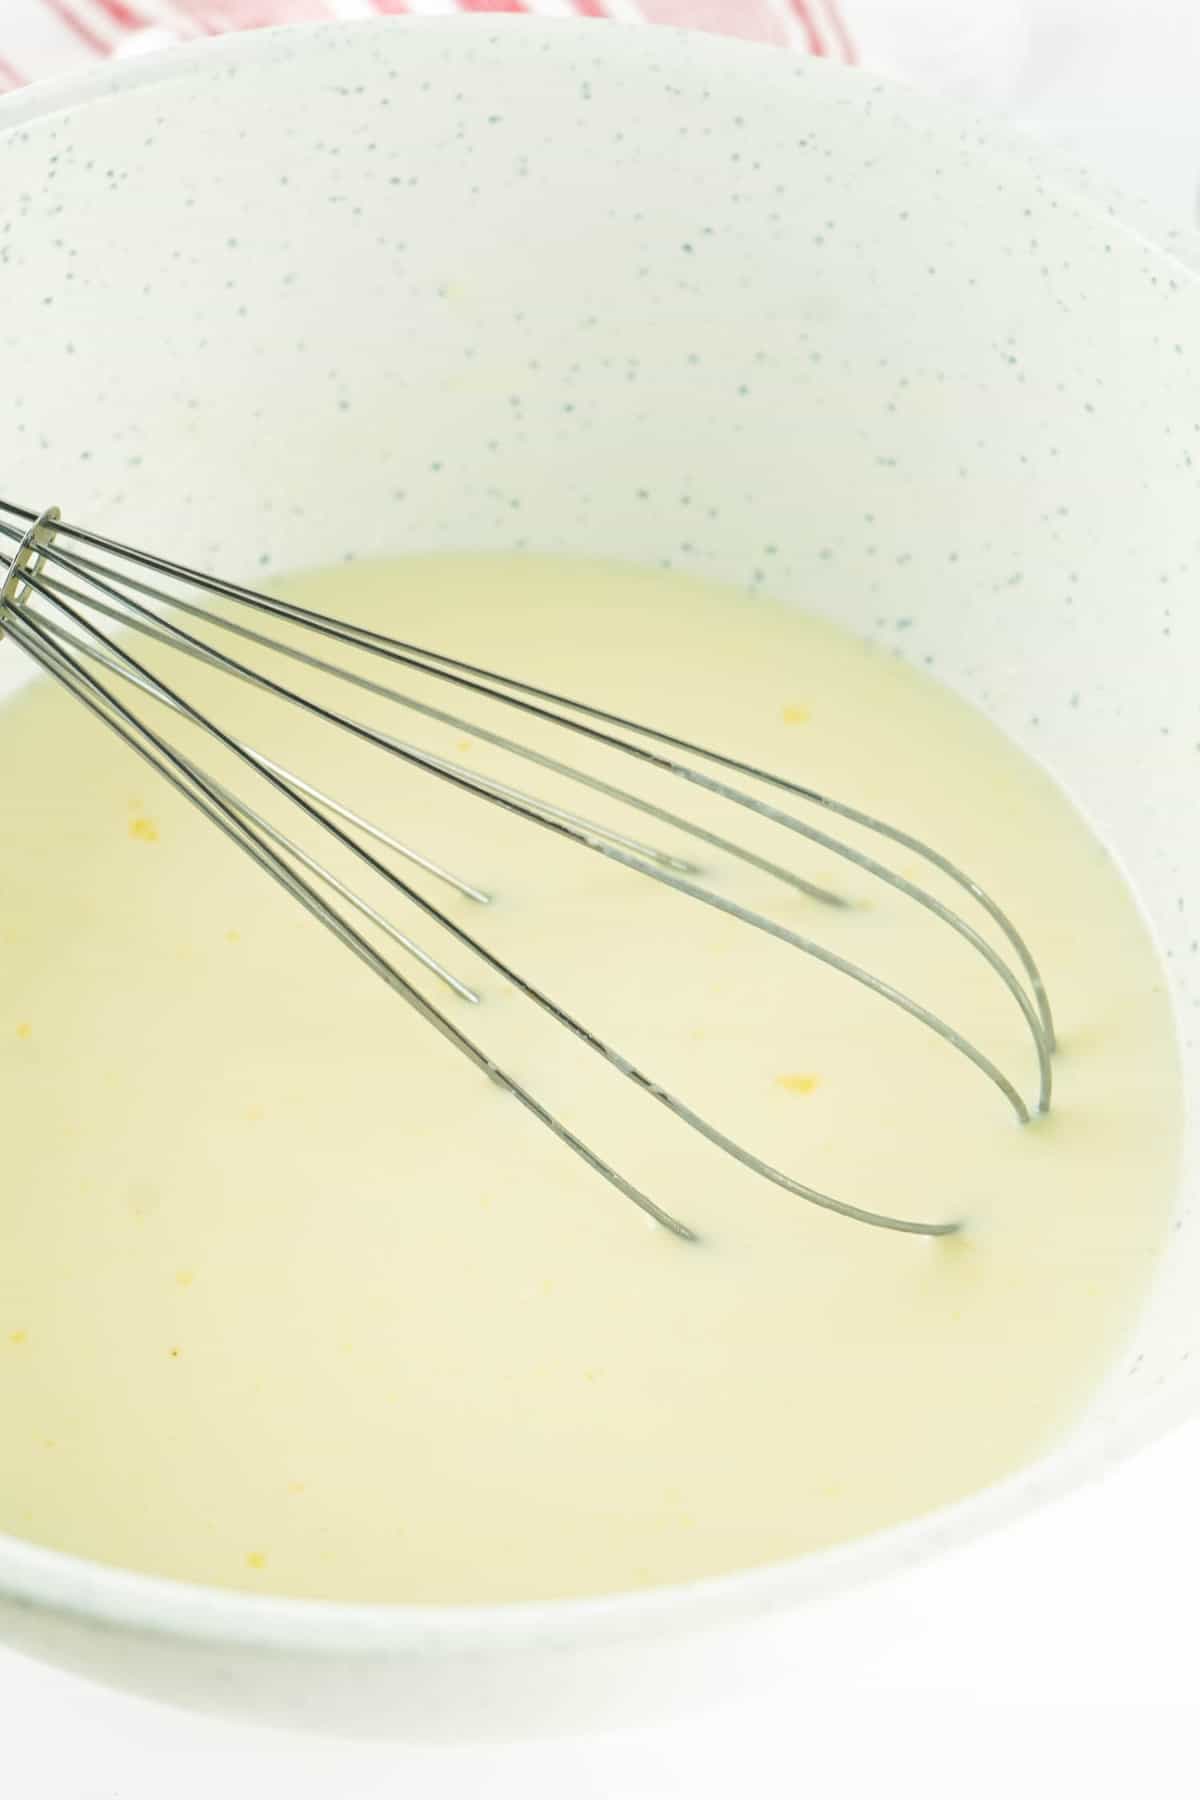 Whisk the milk and Cheesecake Pudding together in the Bowl.